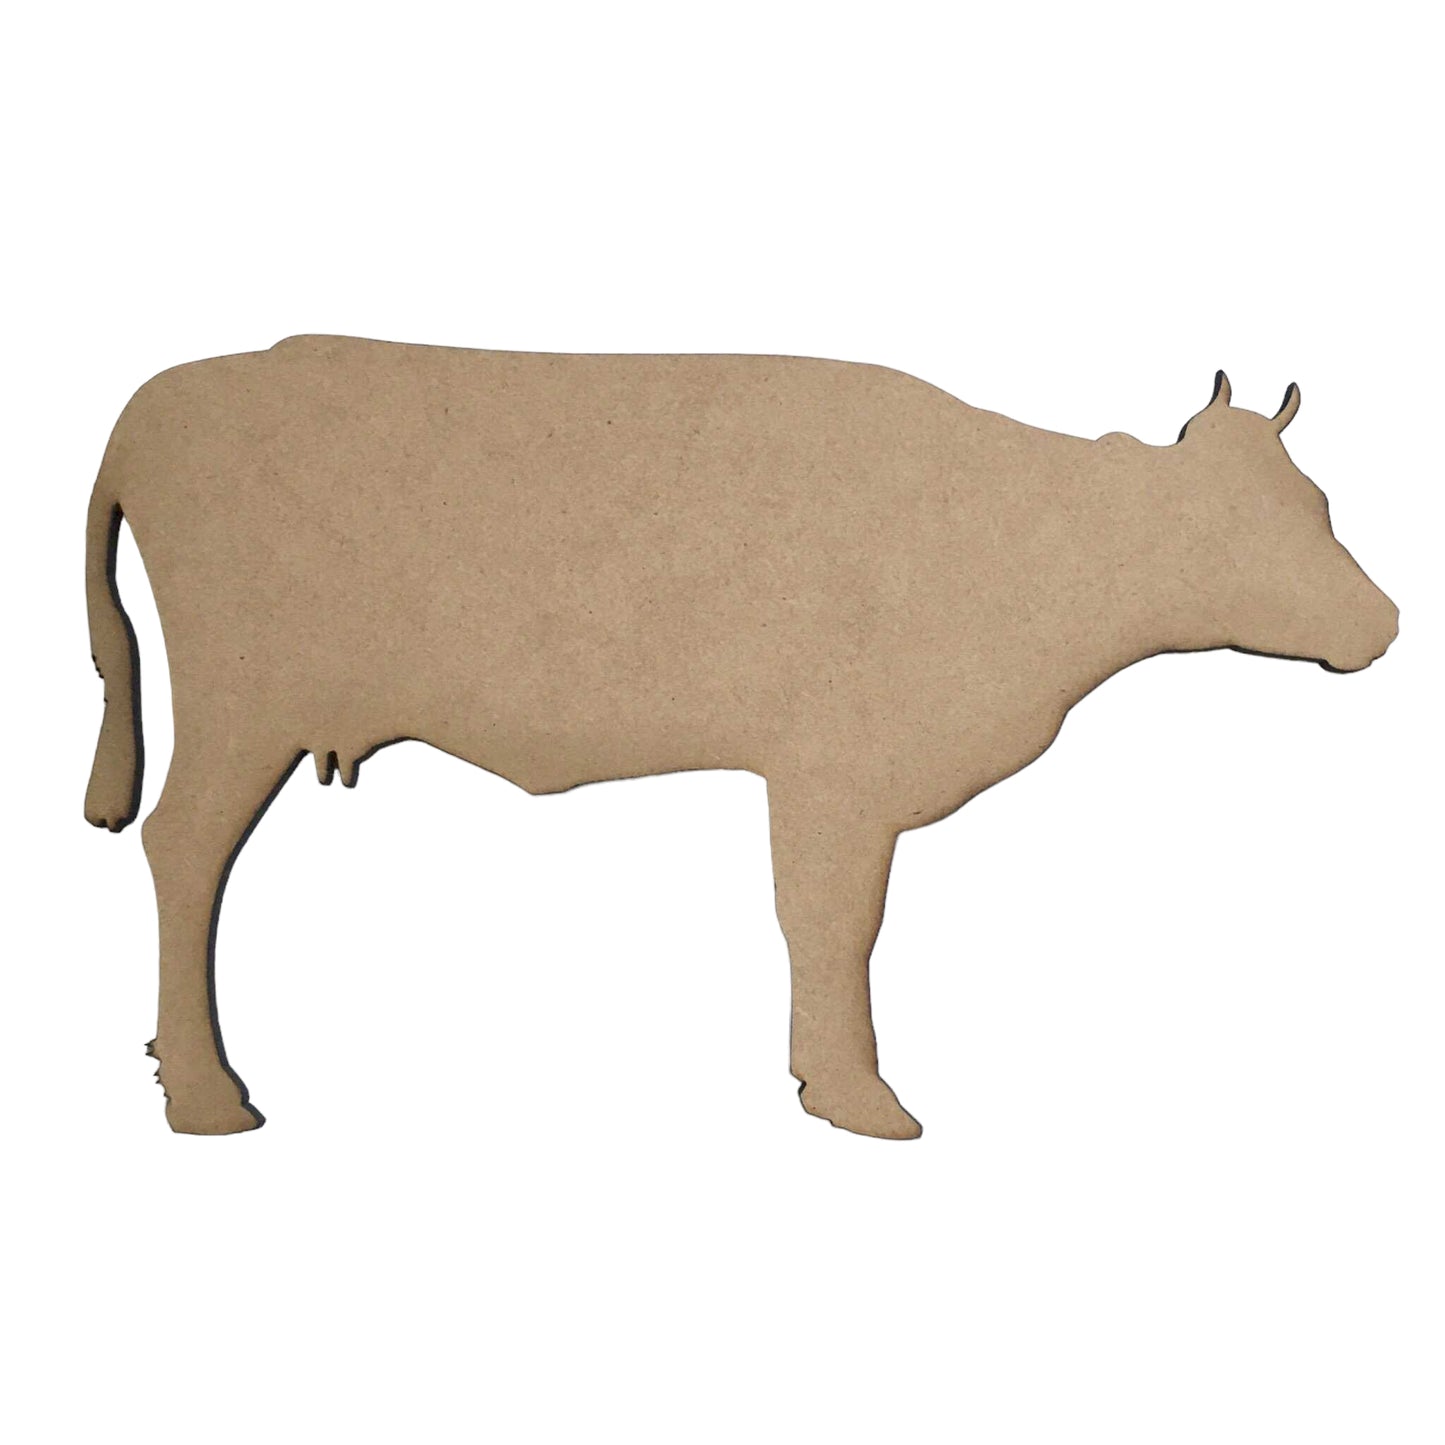 Cow MDF Shape Raw Cut Out Art Wood - The Renmy Store Homewares & Gifts 